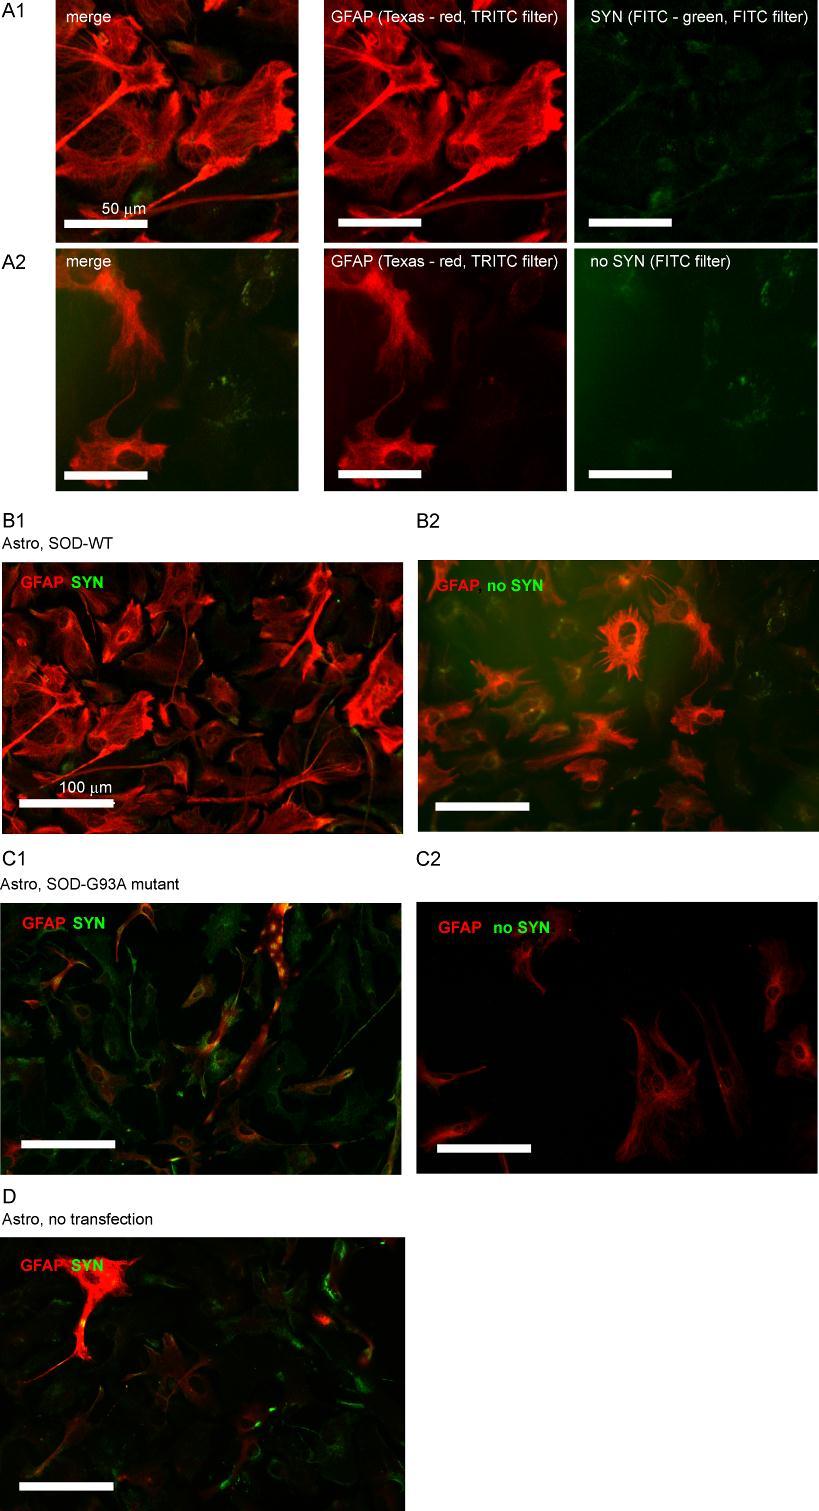 Suppl. figure S4: False colored confocal images of immunofluorescent labeled astrocytes in standard Petri dishes.